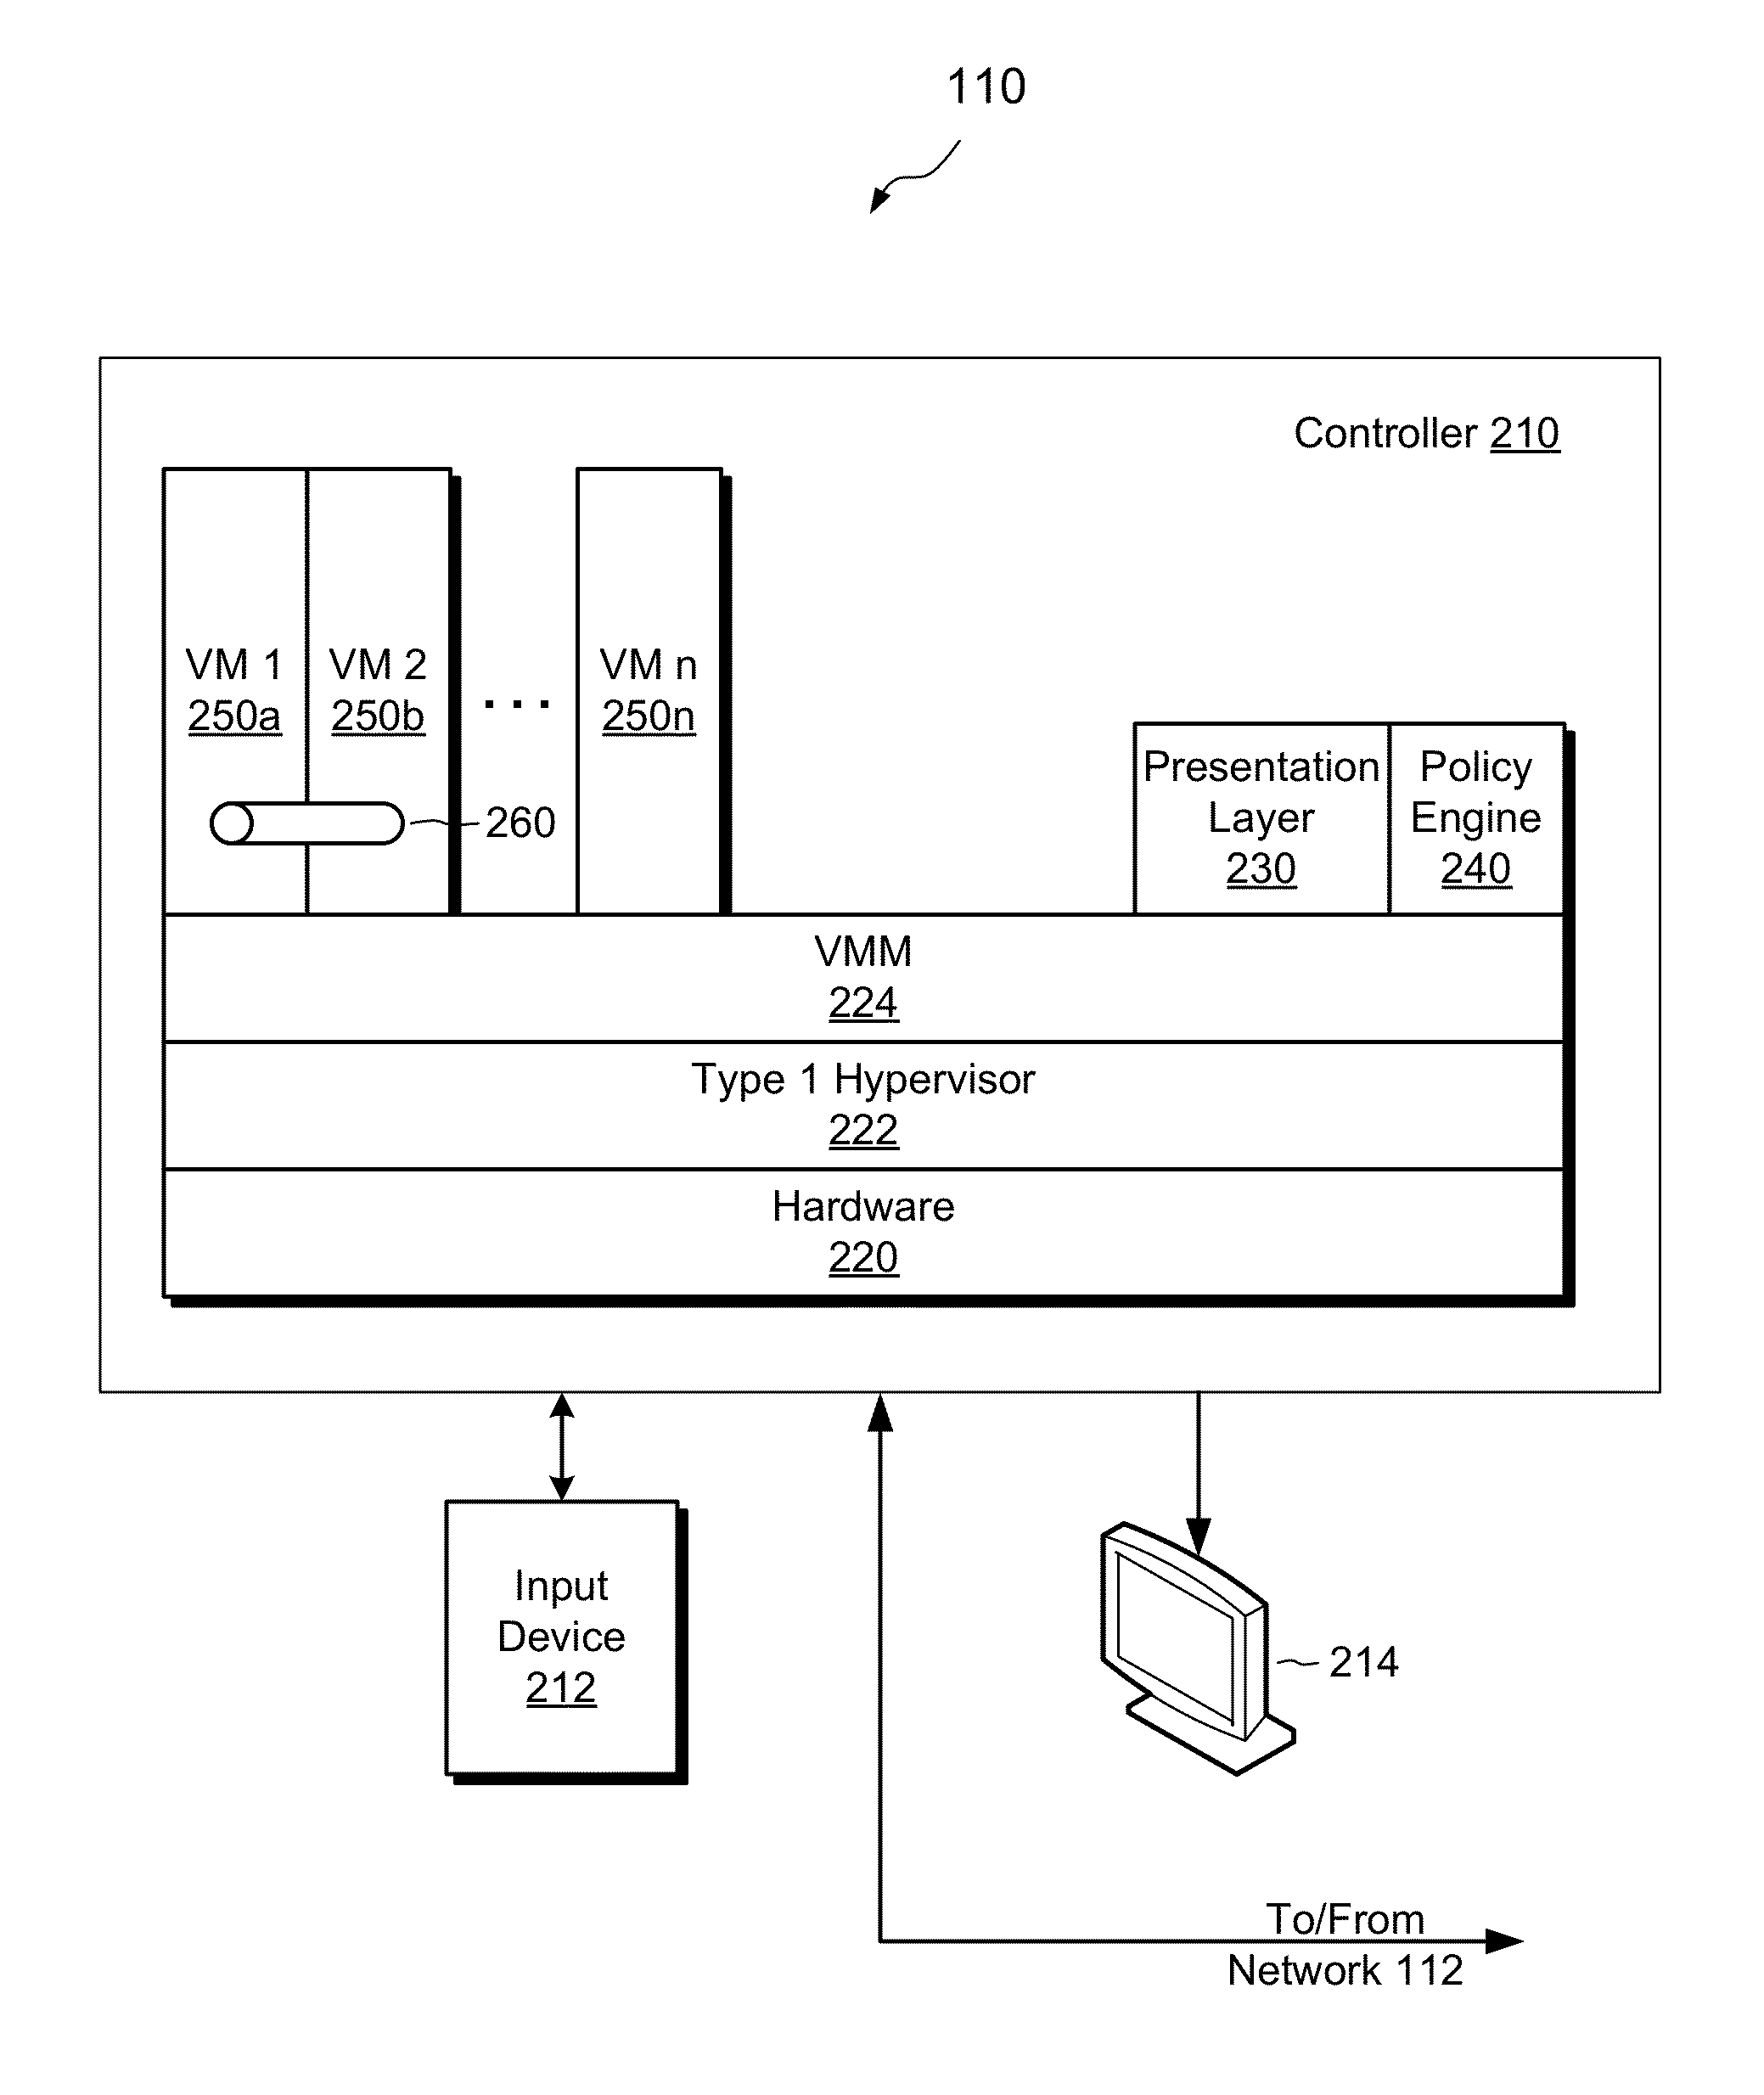 Computing with presentation layer for multiple virtual machines